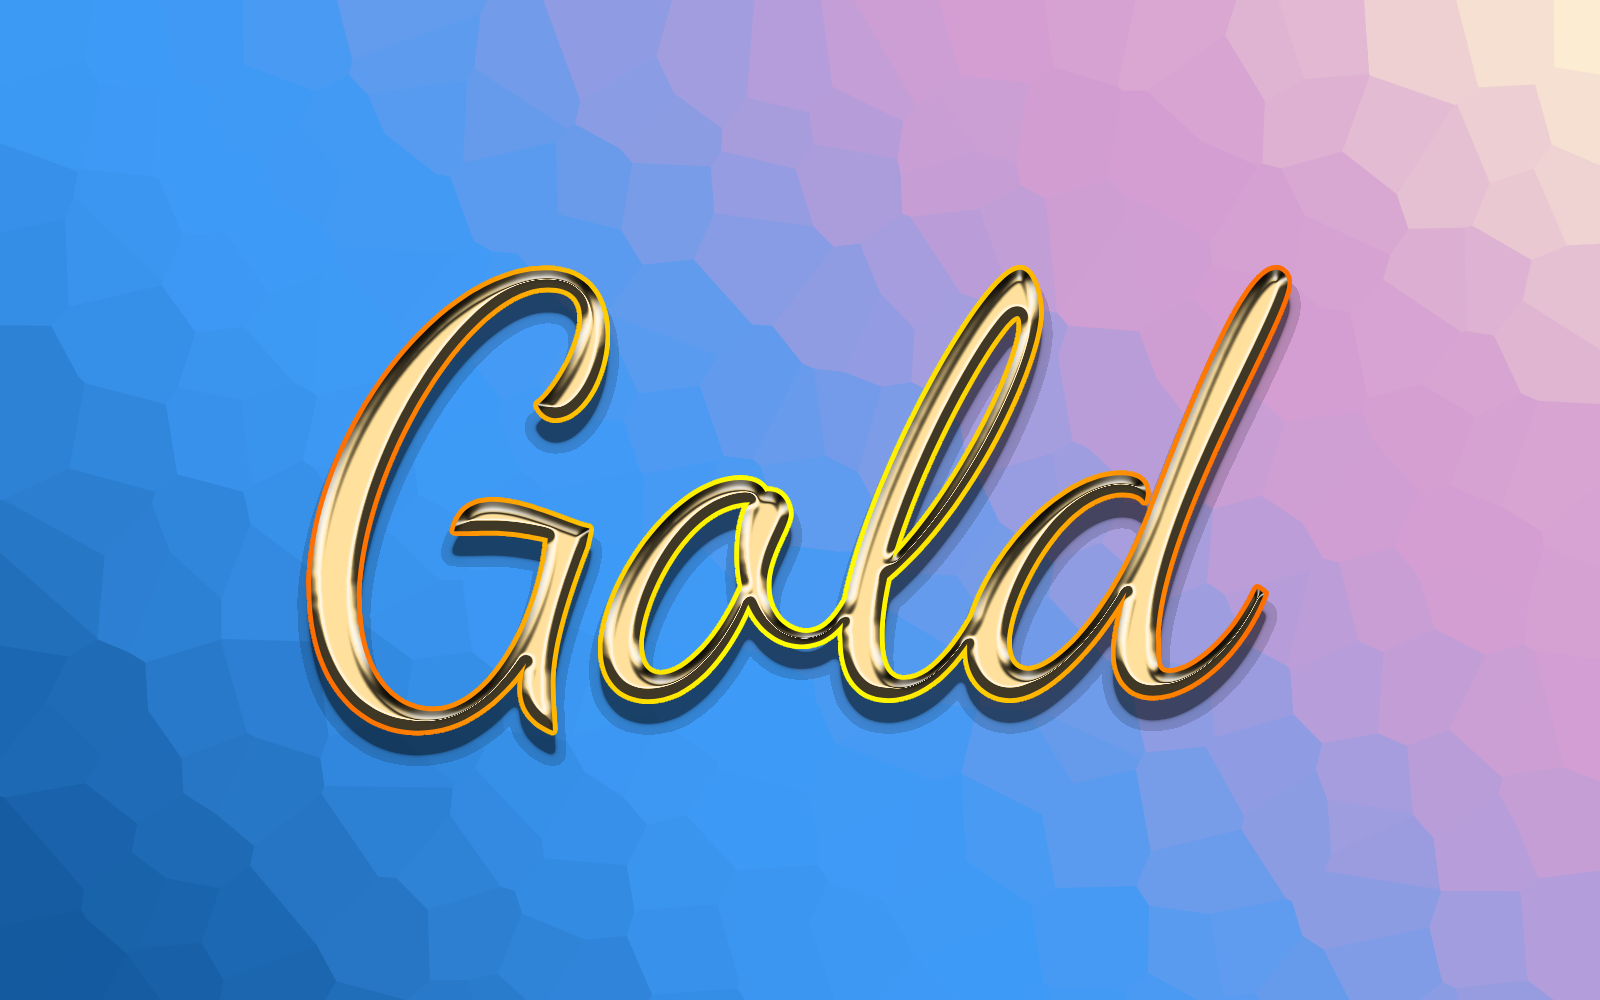 Golden - Editable Text Effect, Text Style, Graphics Illustration